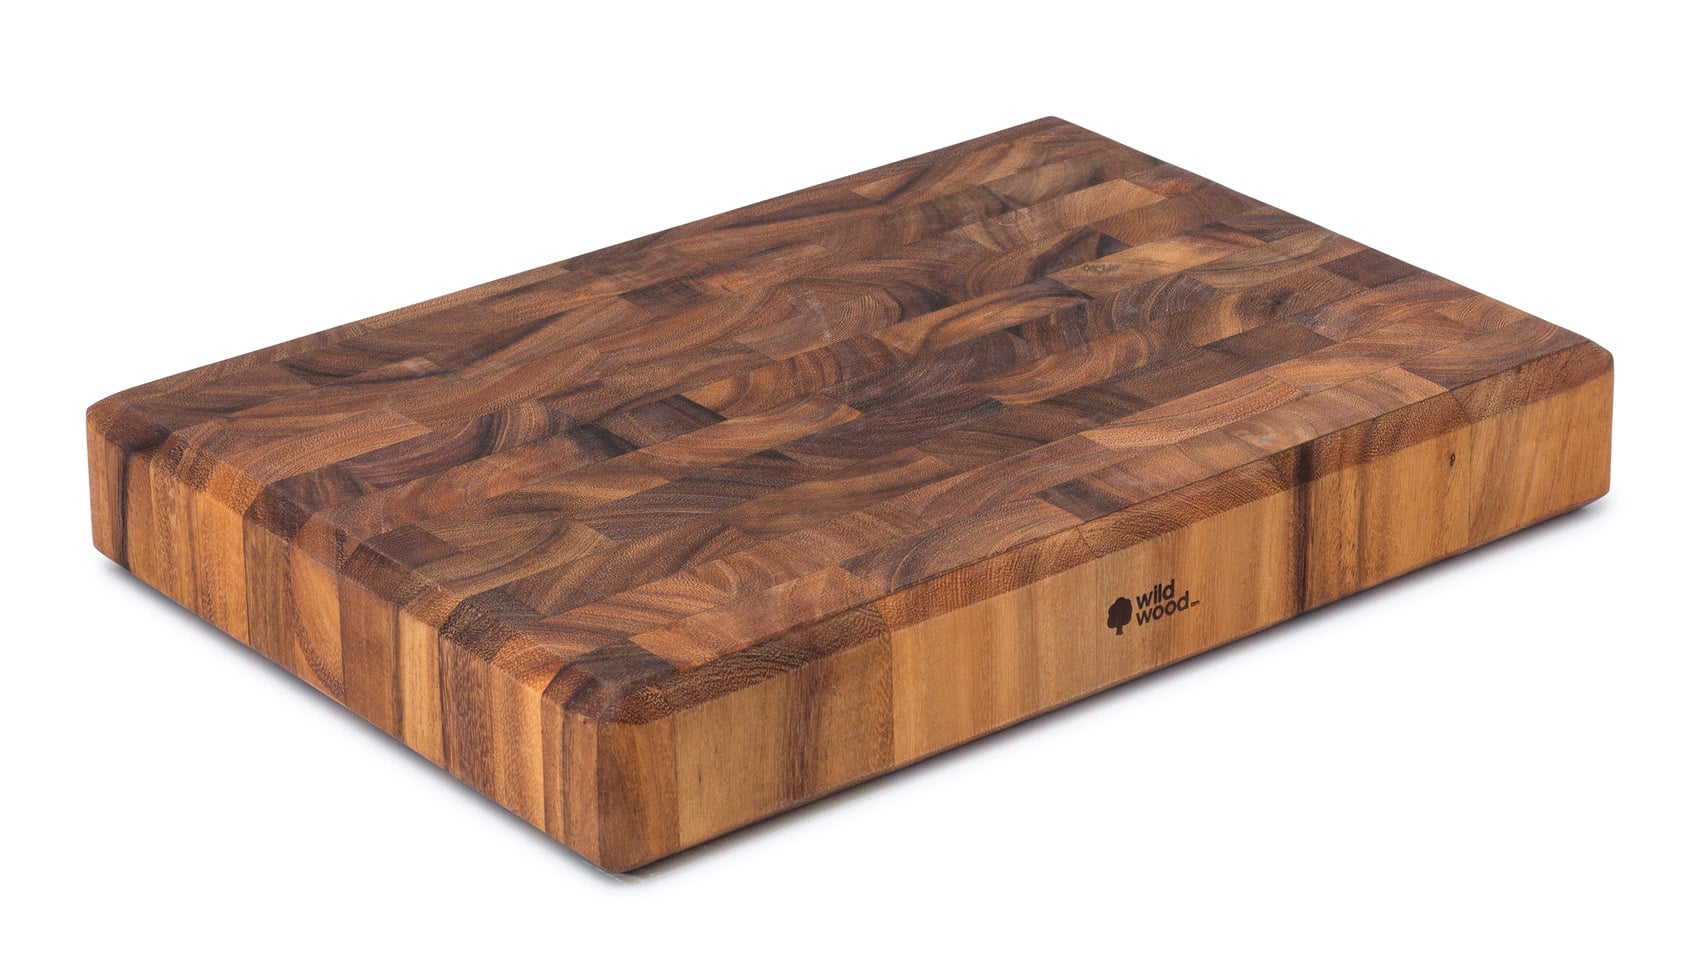 Thick wooden chopping board